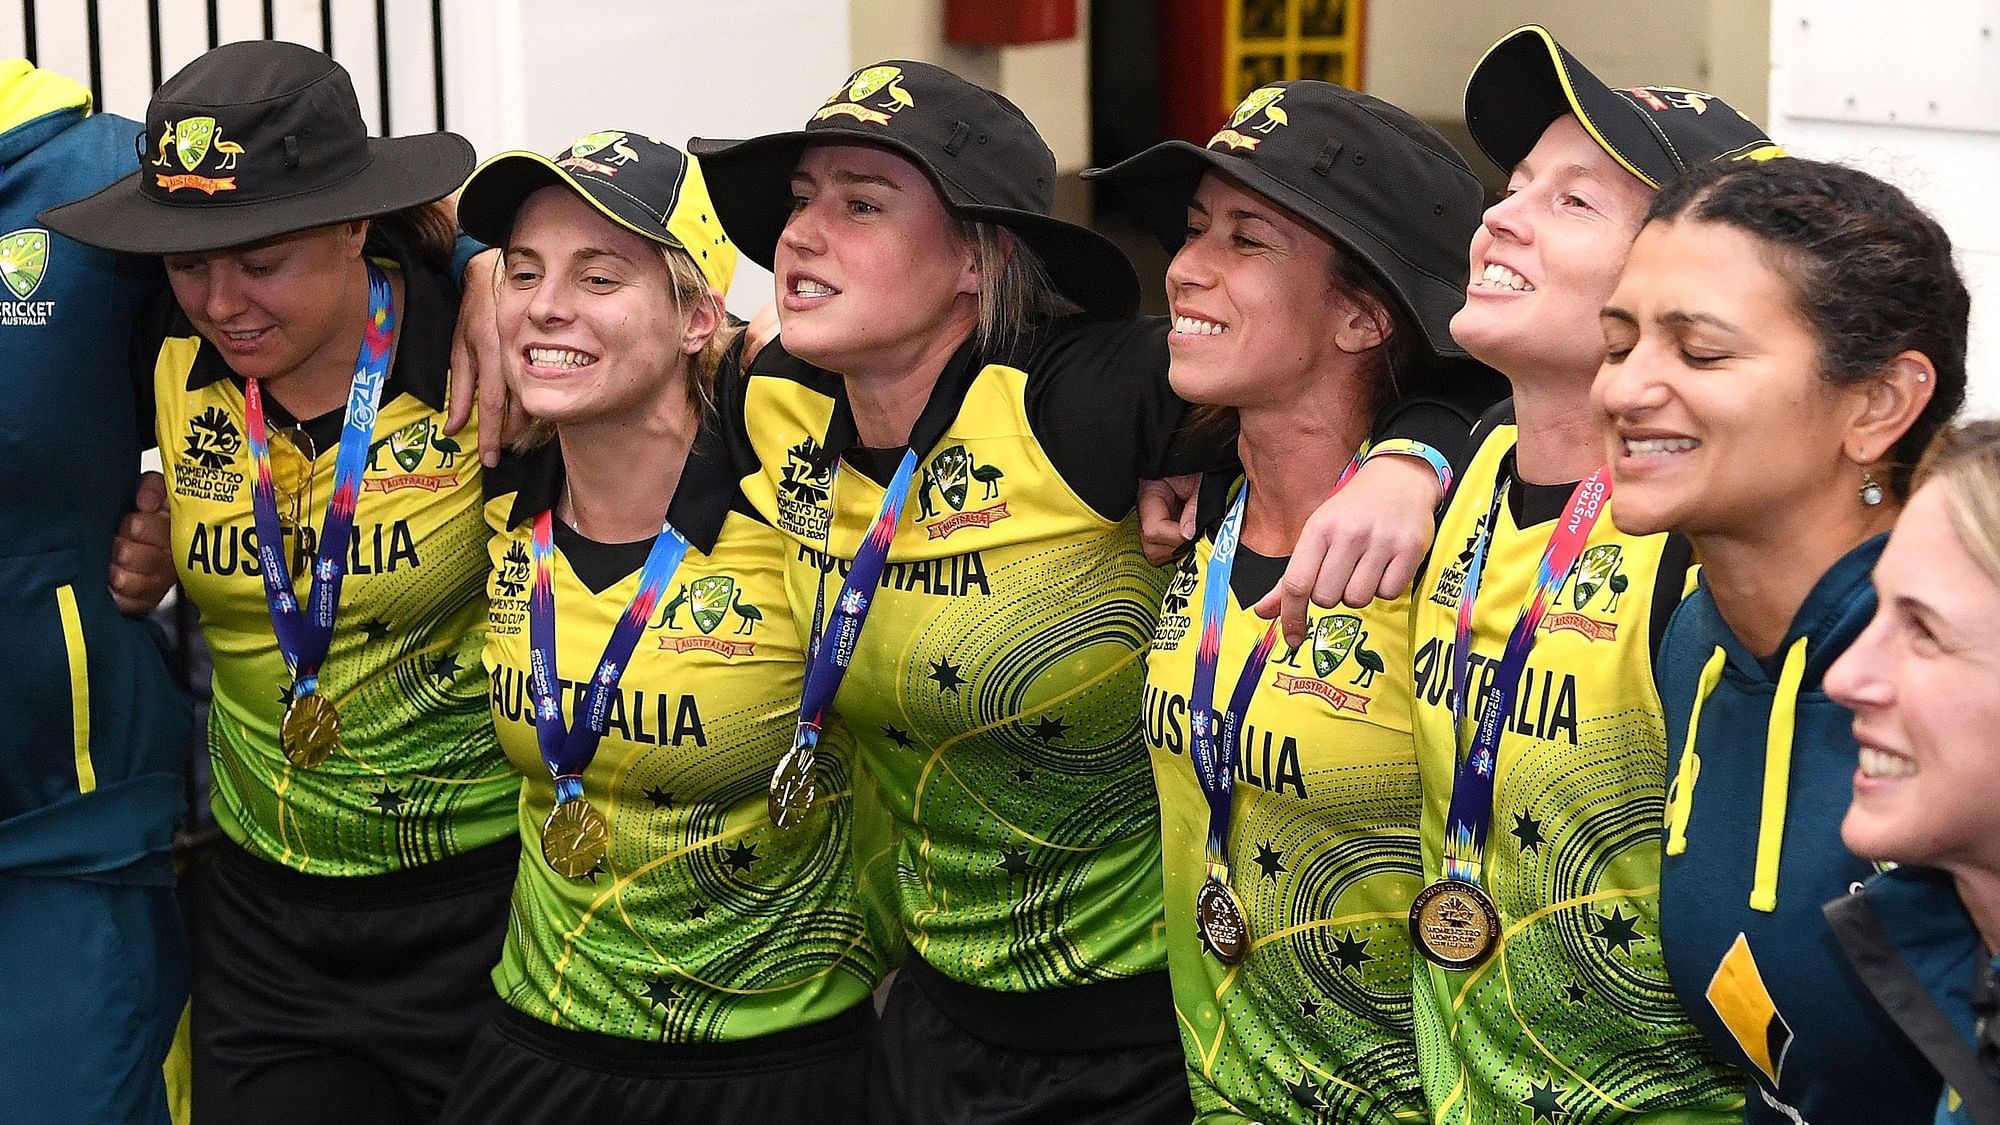 Netflix has released ICC’s documentary ‘Beyond The Boundary’ on the 2020 Women’s T20 World Cup.